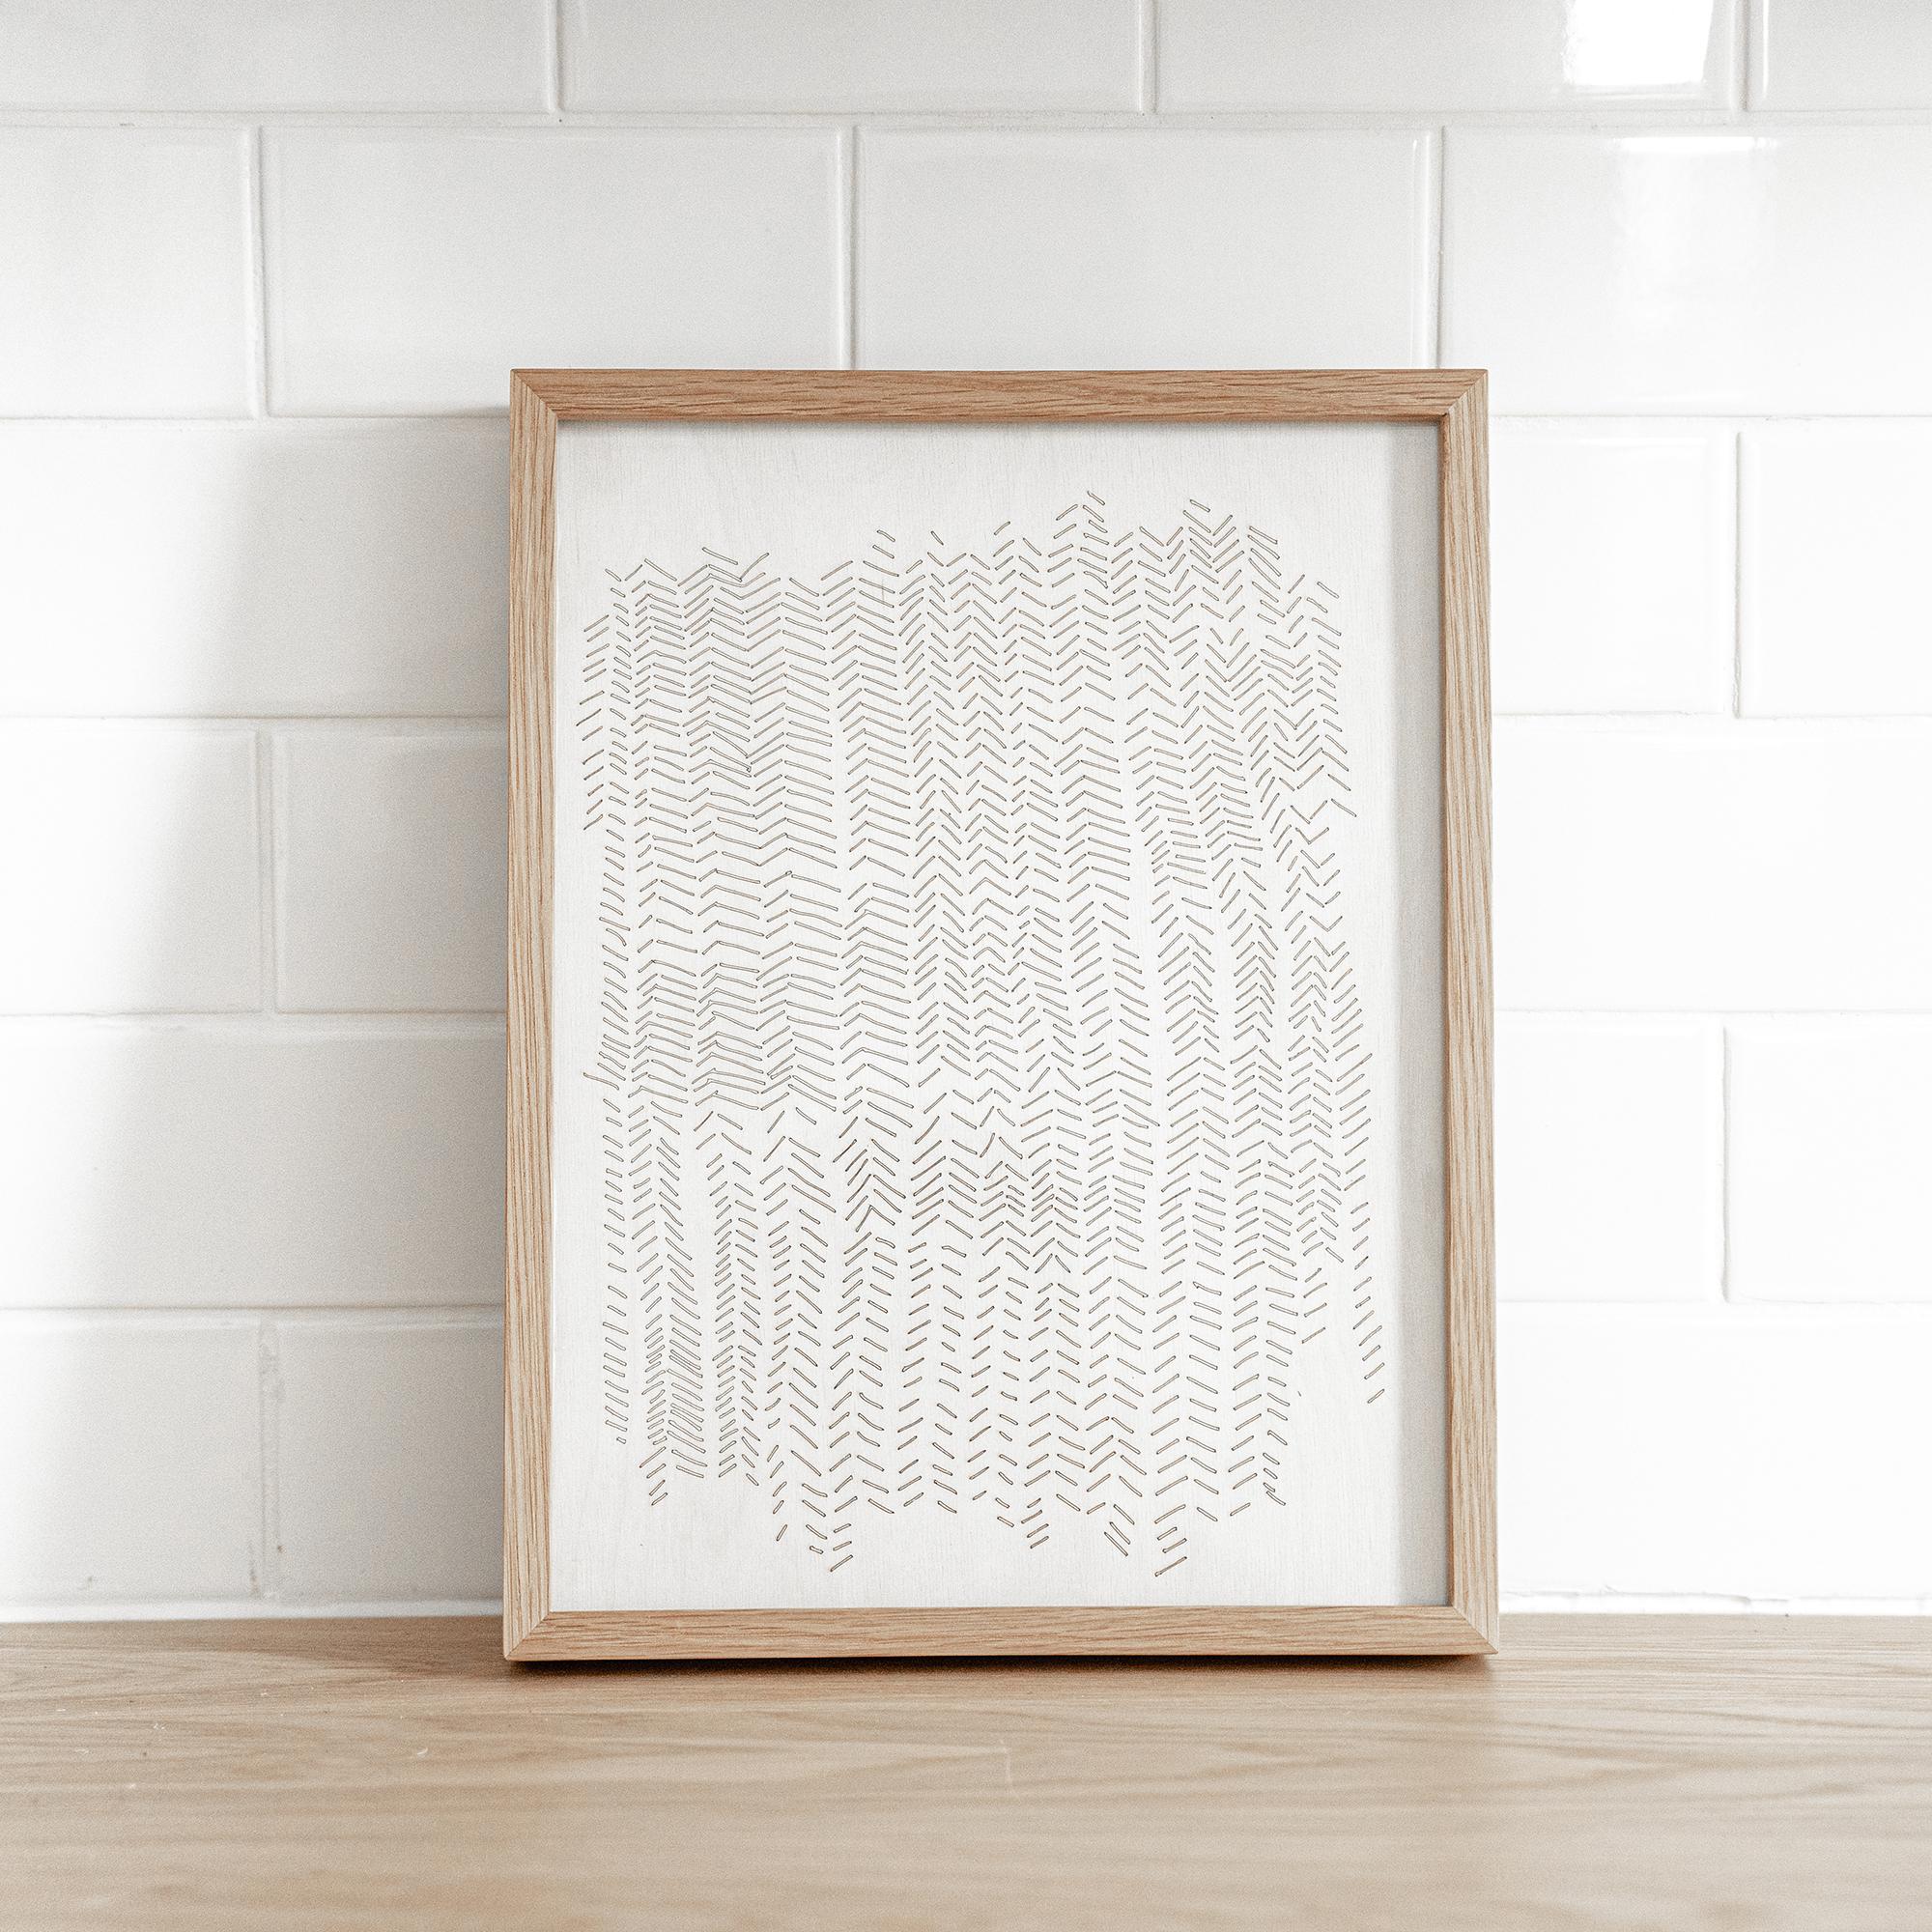 Minimalist In Prints Etching into White Washed Birch 'Herringbone' For Sale